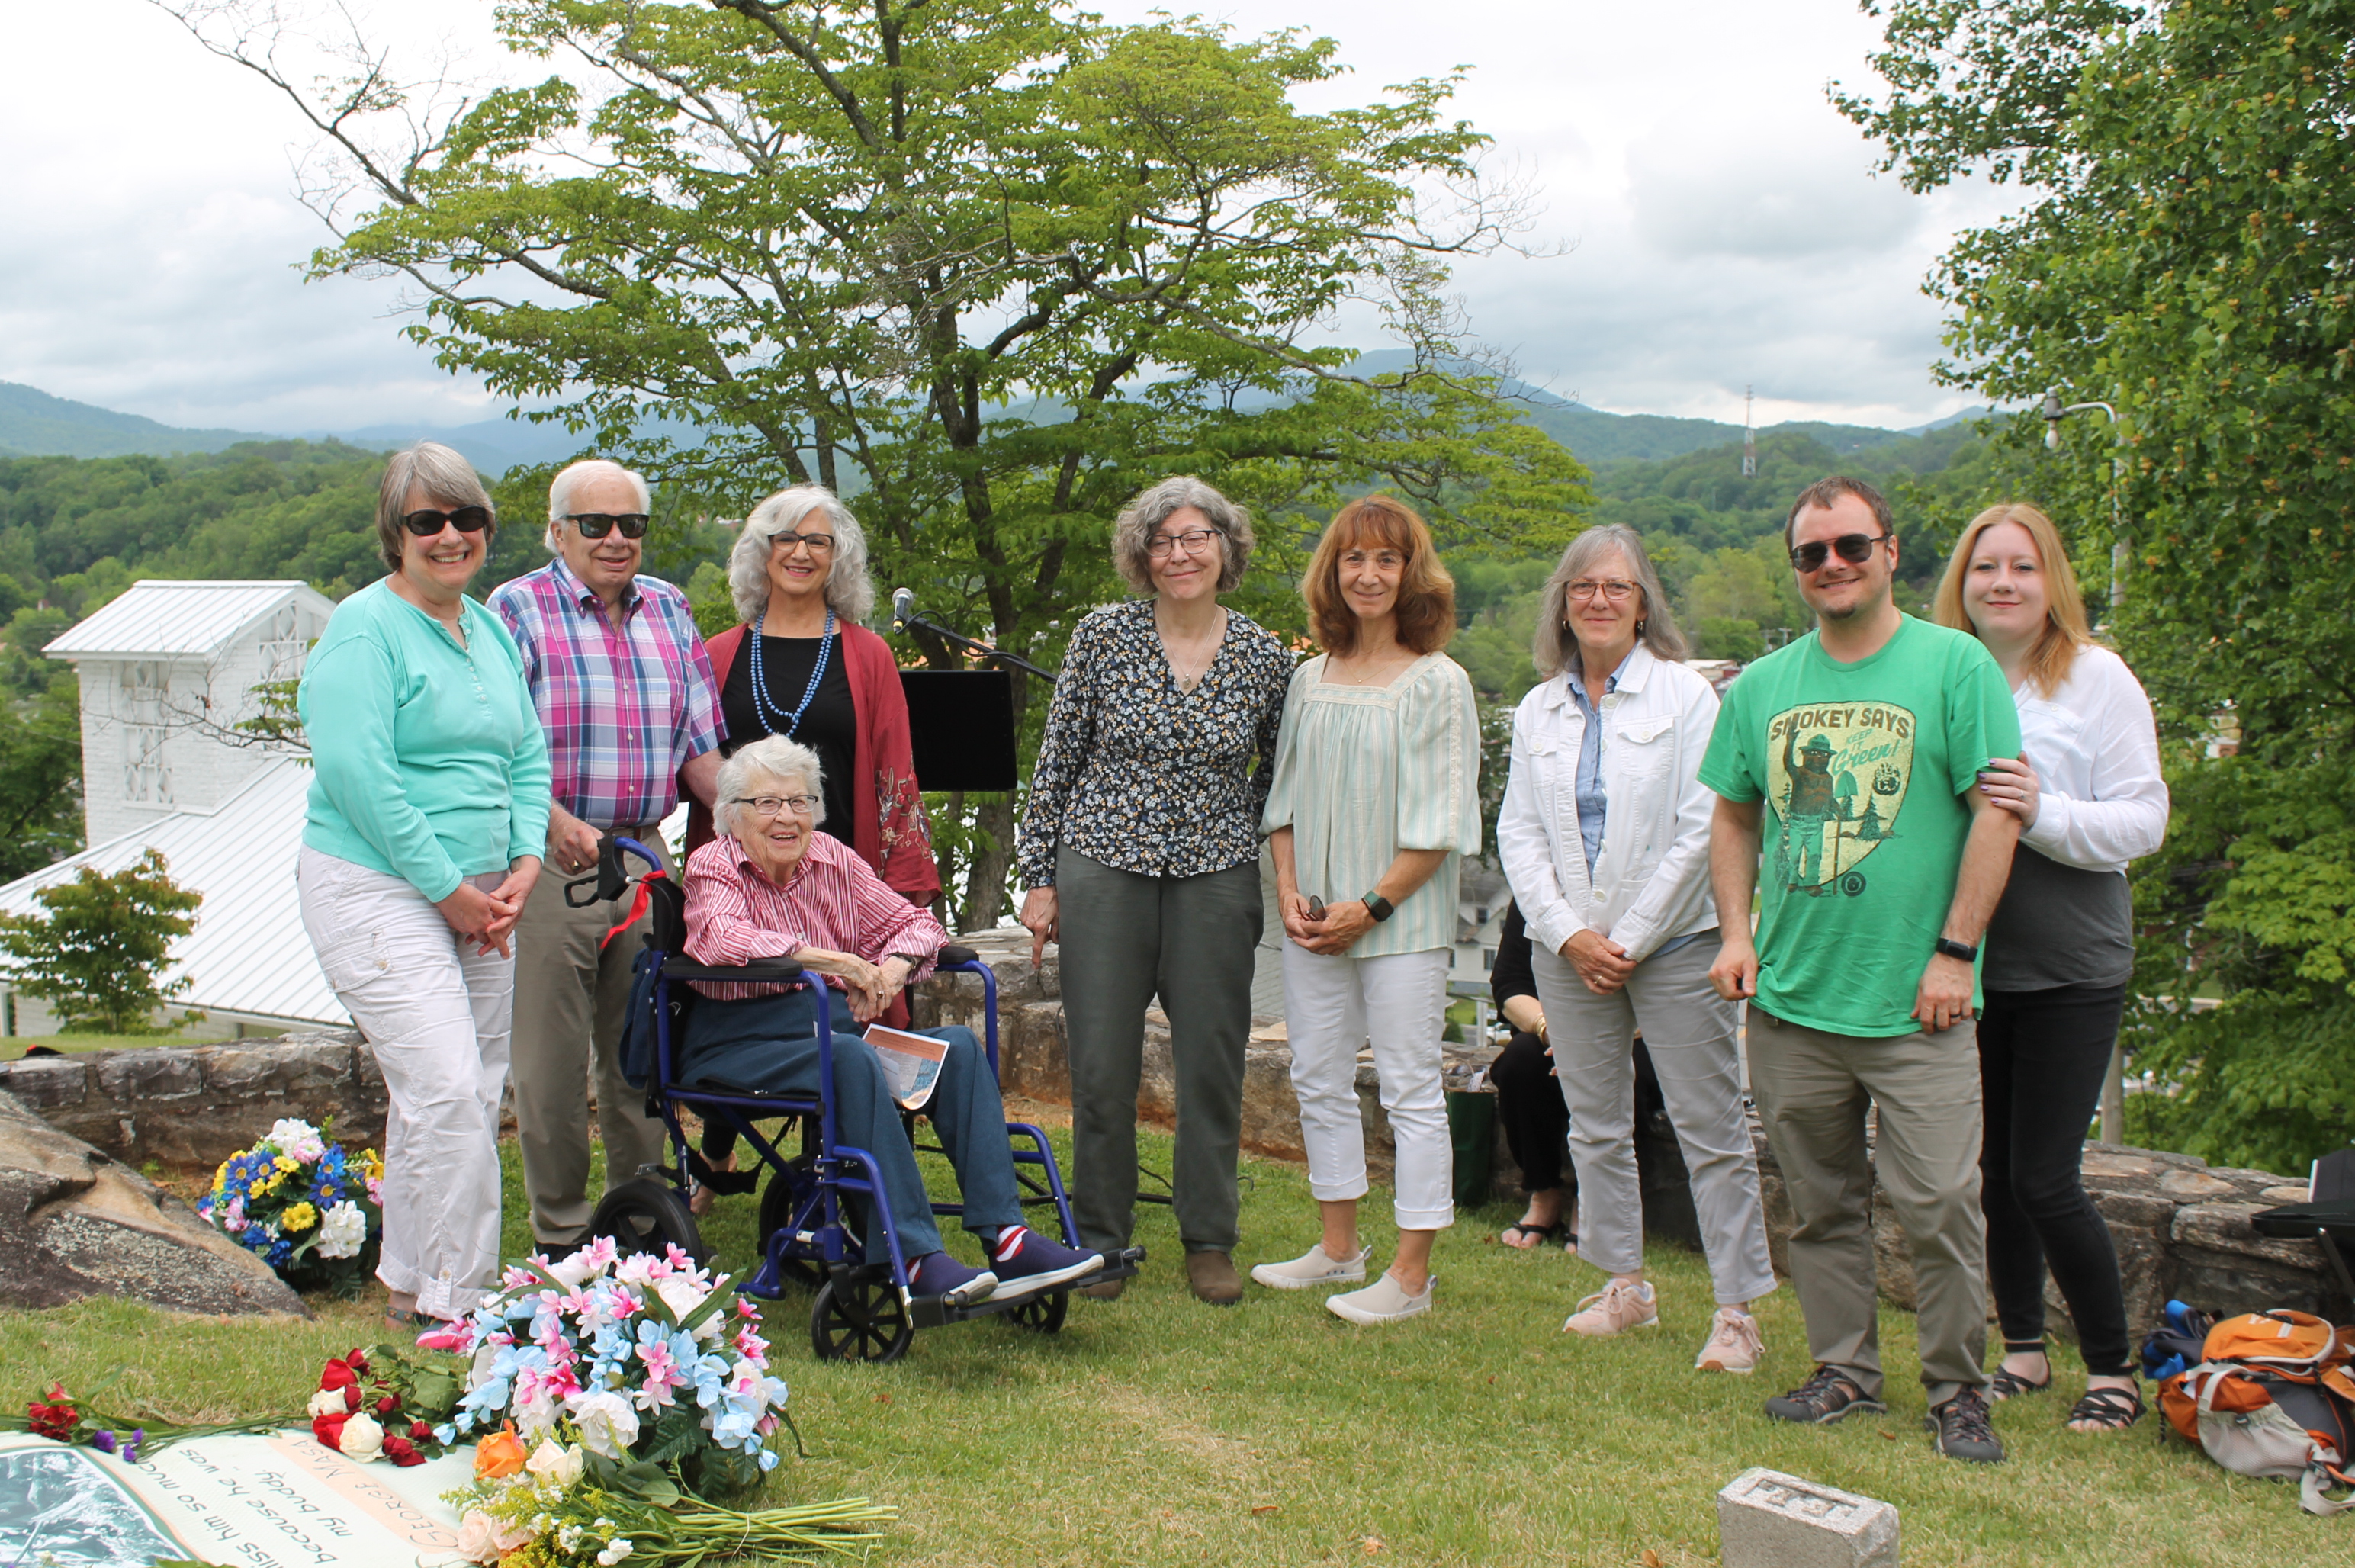 Descendants of author and nature activist Horace Kephart gathered this weekend in town for the Kephart Days ceremony, notable this year for the unveiling of grave markers for George Masa and Laura Kephart, as well as for being the 100th birthday of Barbara Kephart Crane, Horace’s granddaughter.